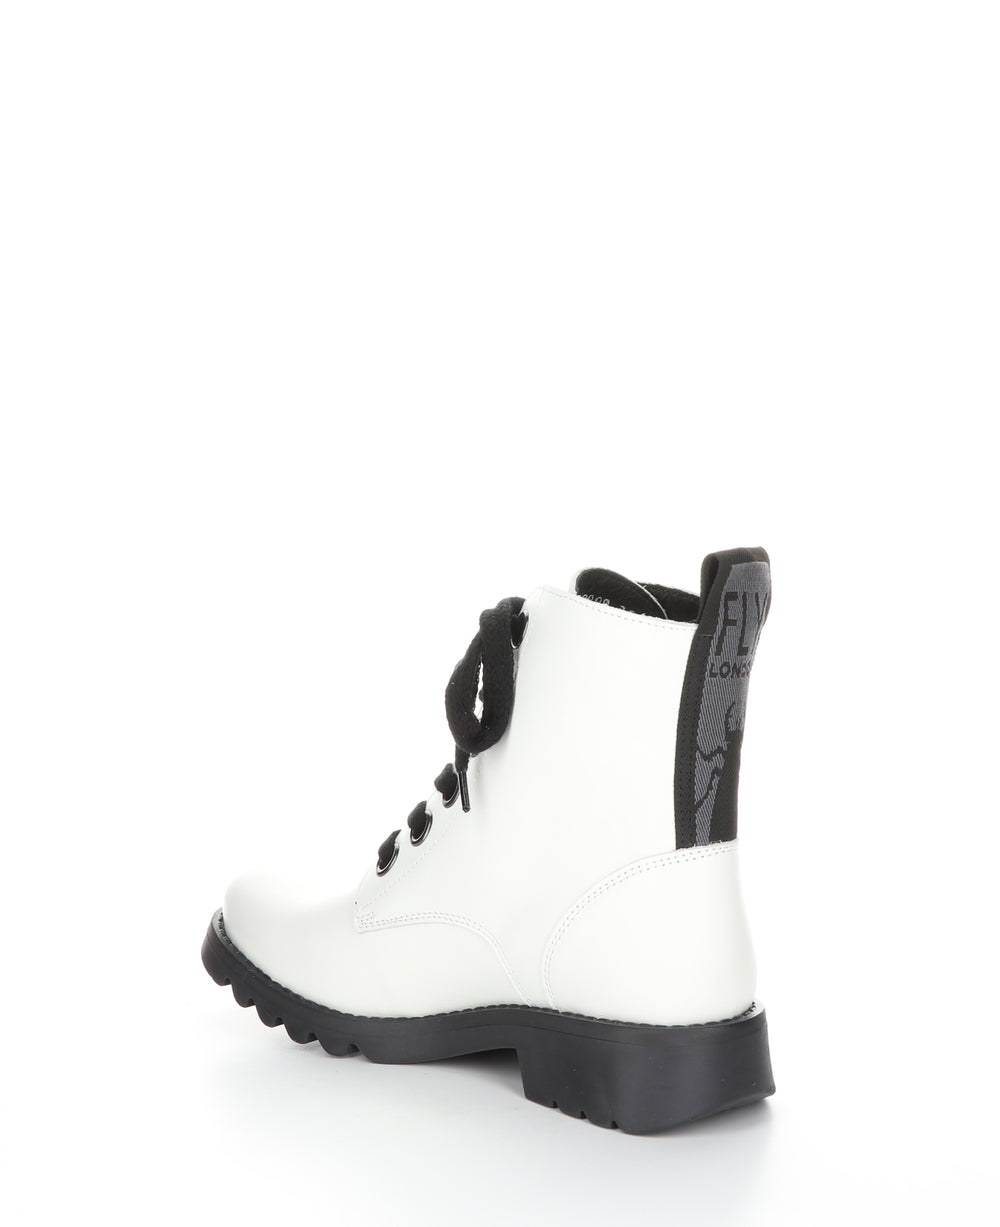 RAGI539FLY Off White Round Toe Boots|RAGI539FLY Bottes à Bout Rond in Blanc